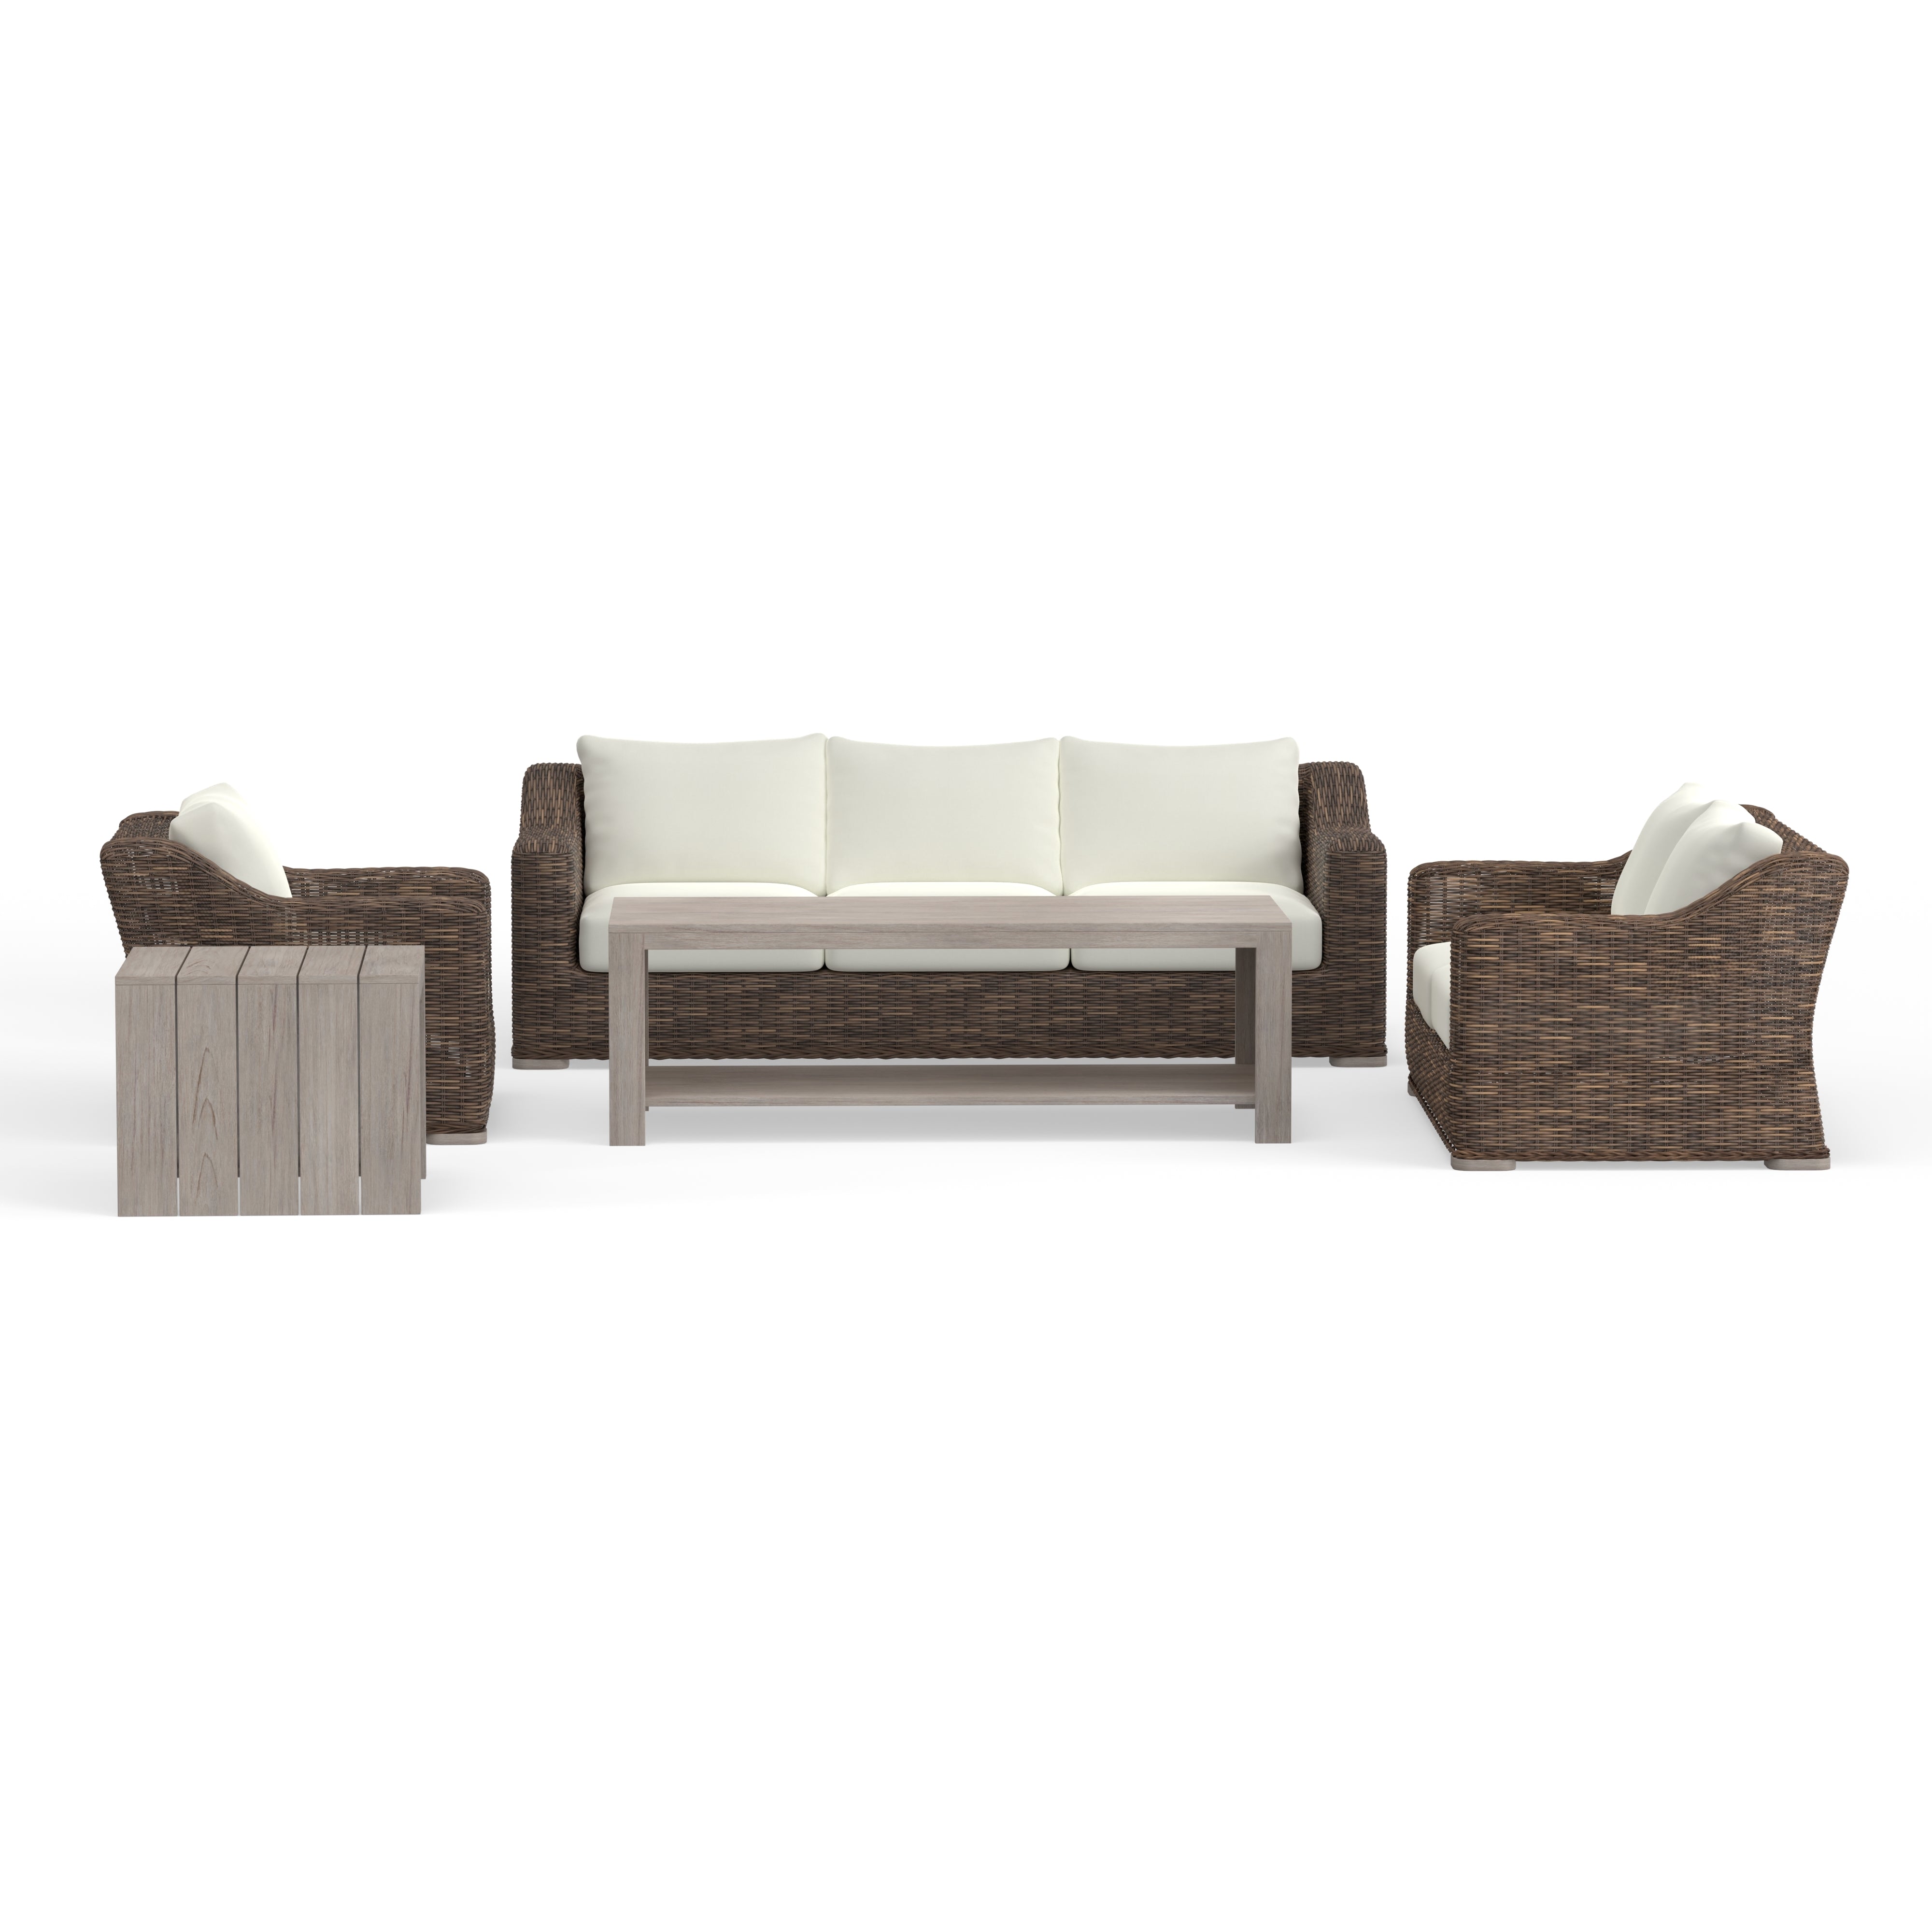 Best Quality Five Piece Wicker Seating Set